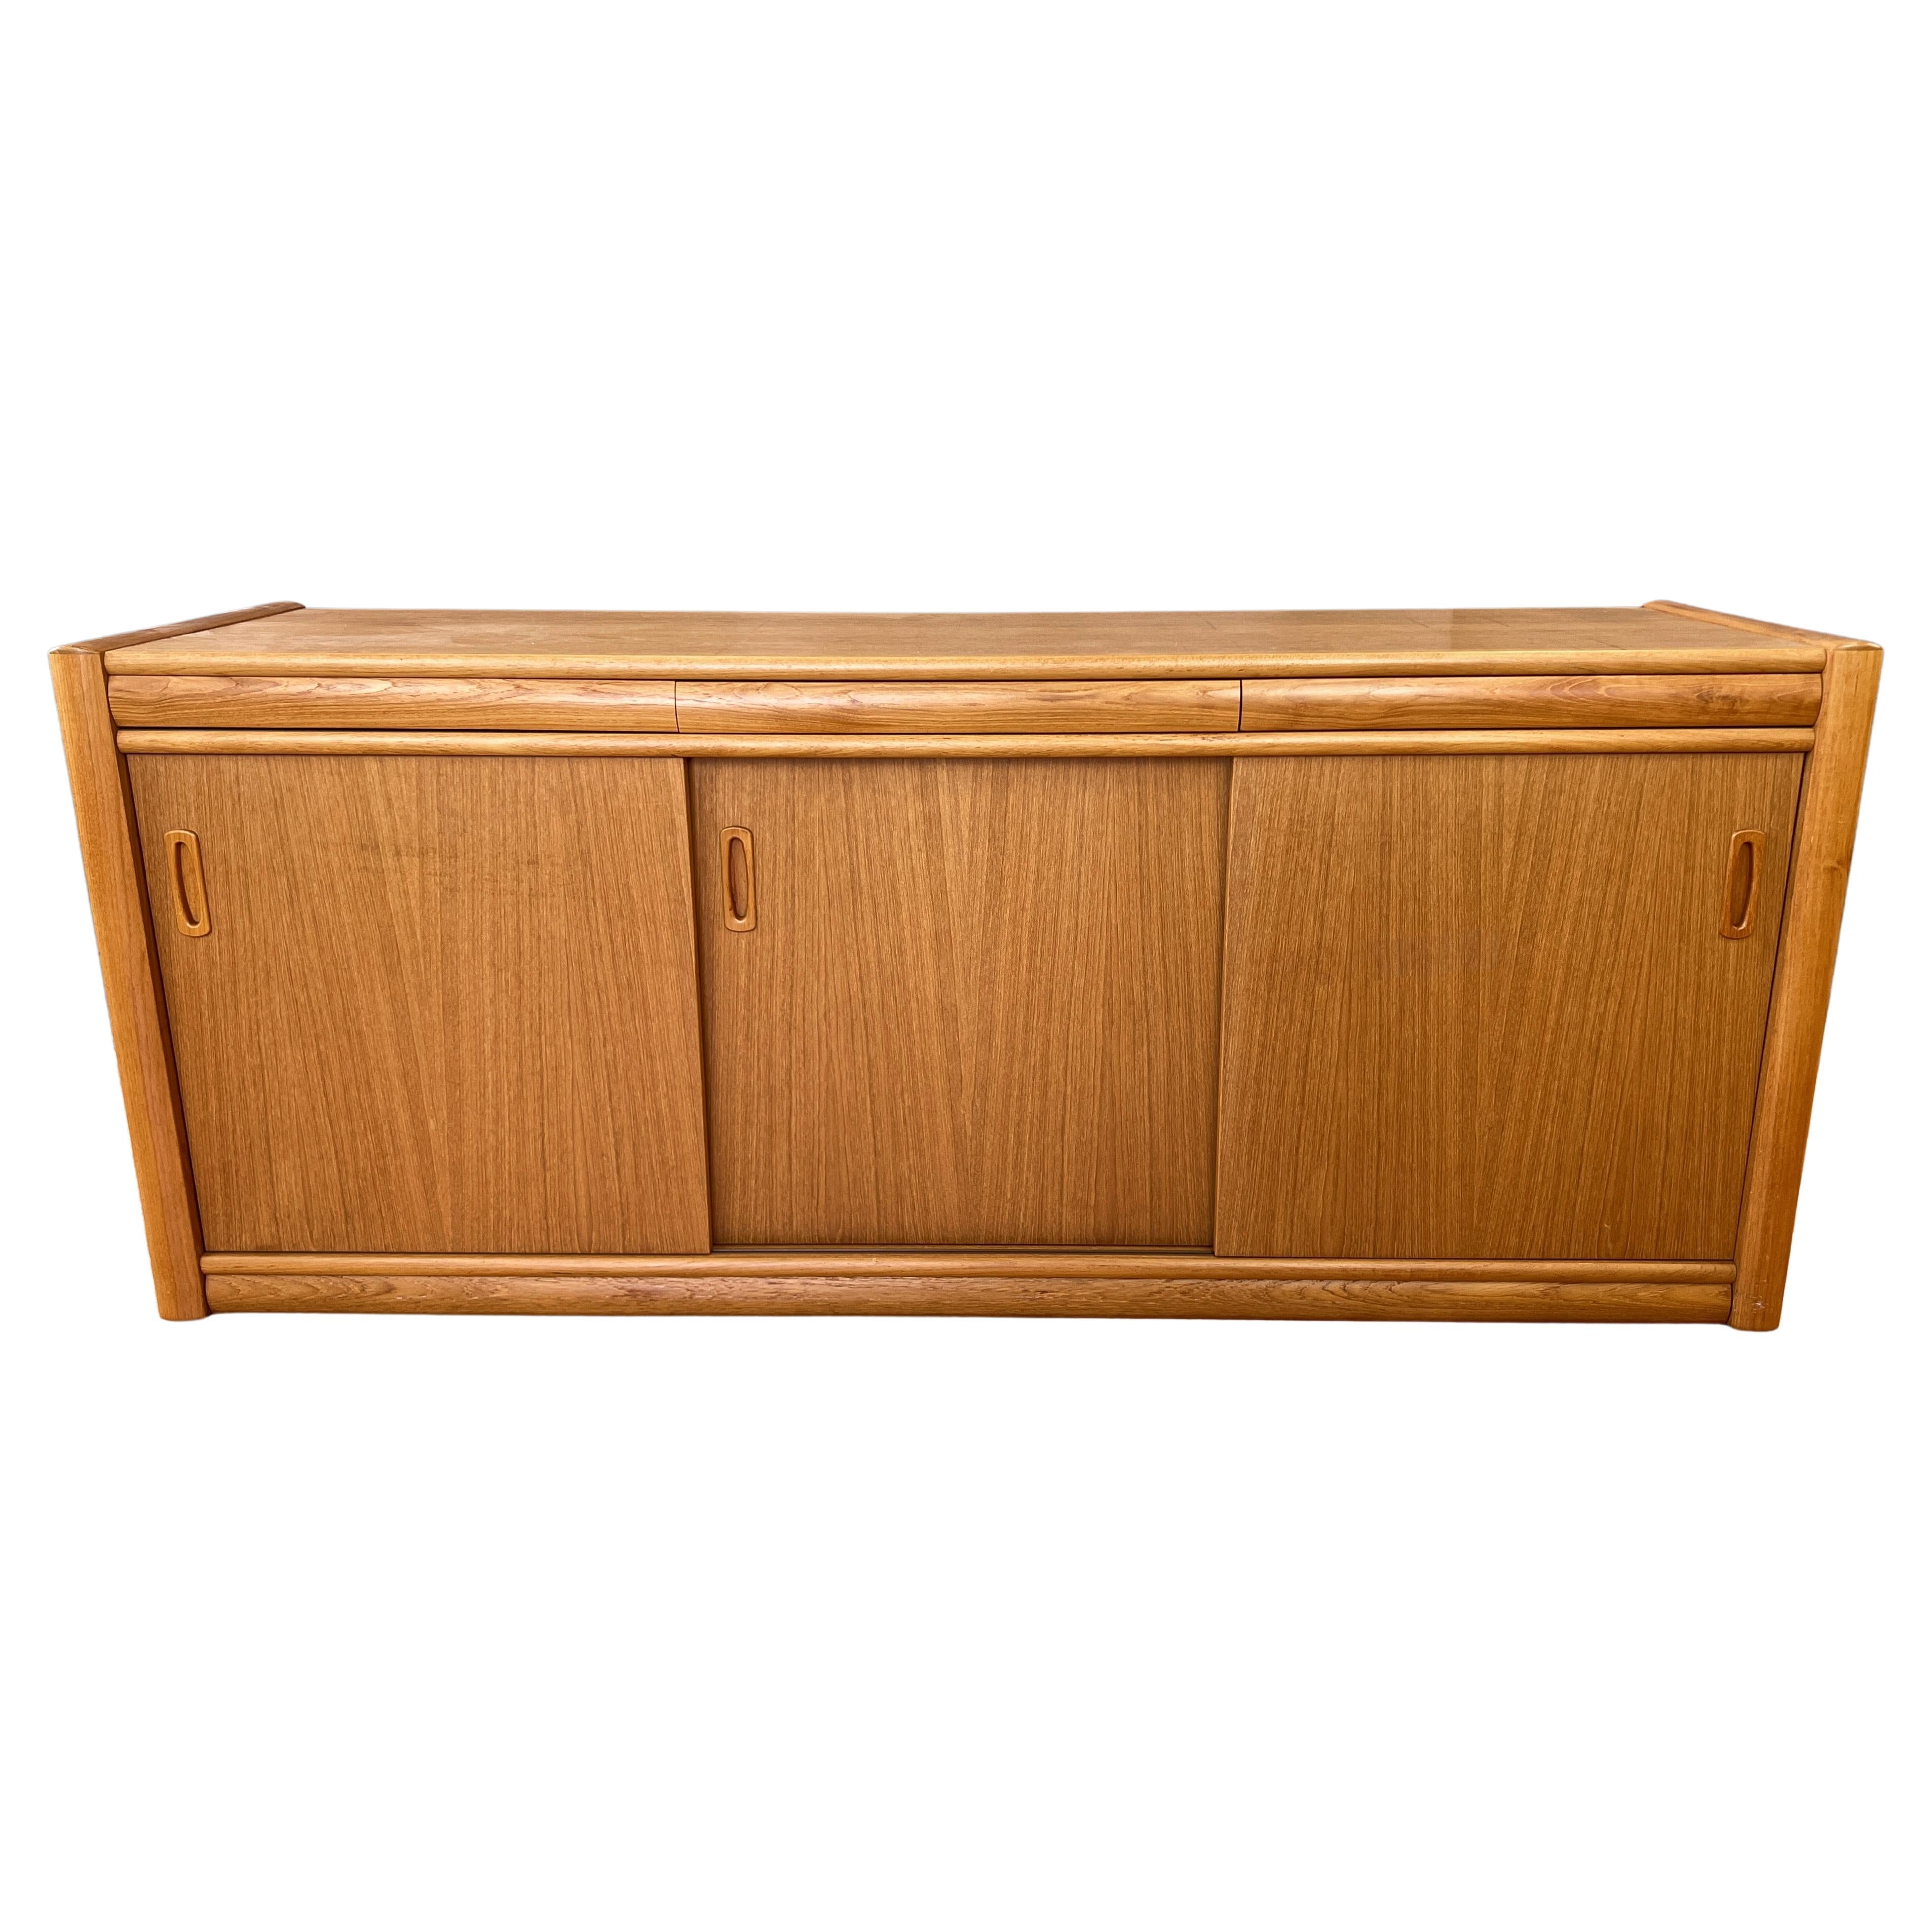 Danish Modern Long Teak Sideboard with Three Doors and Three Drawers, 1970s For Sale